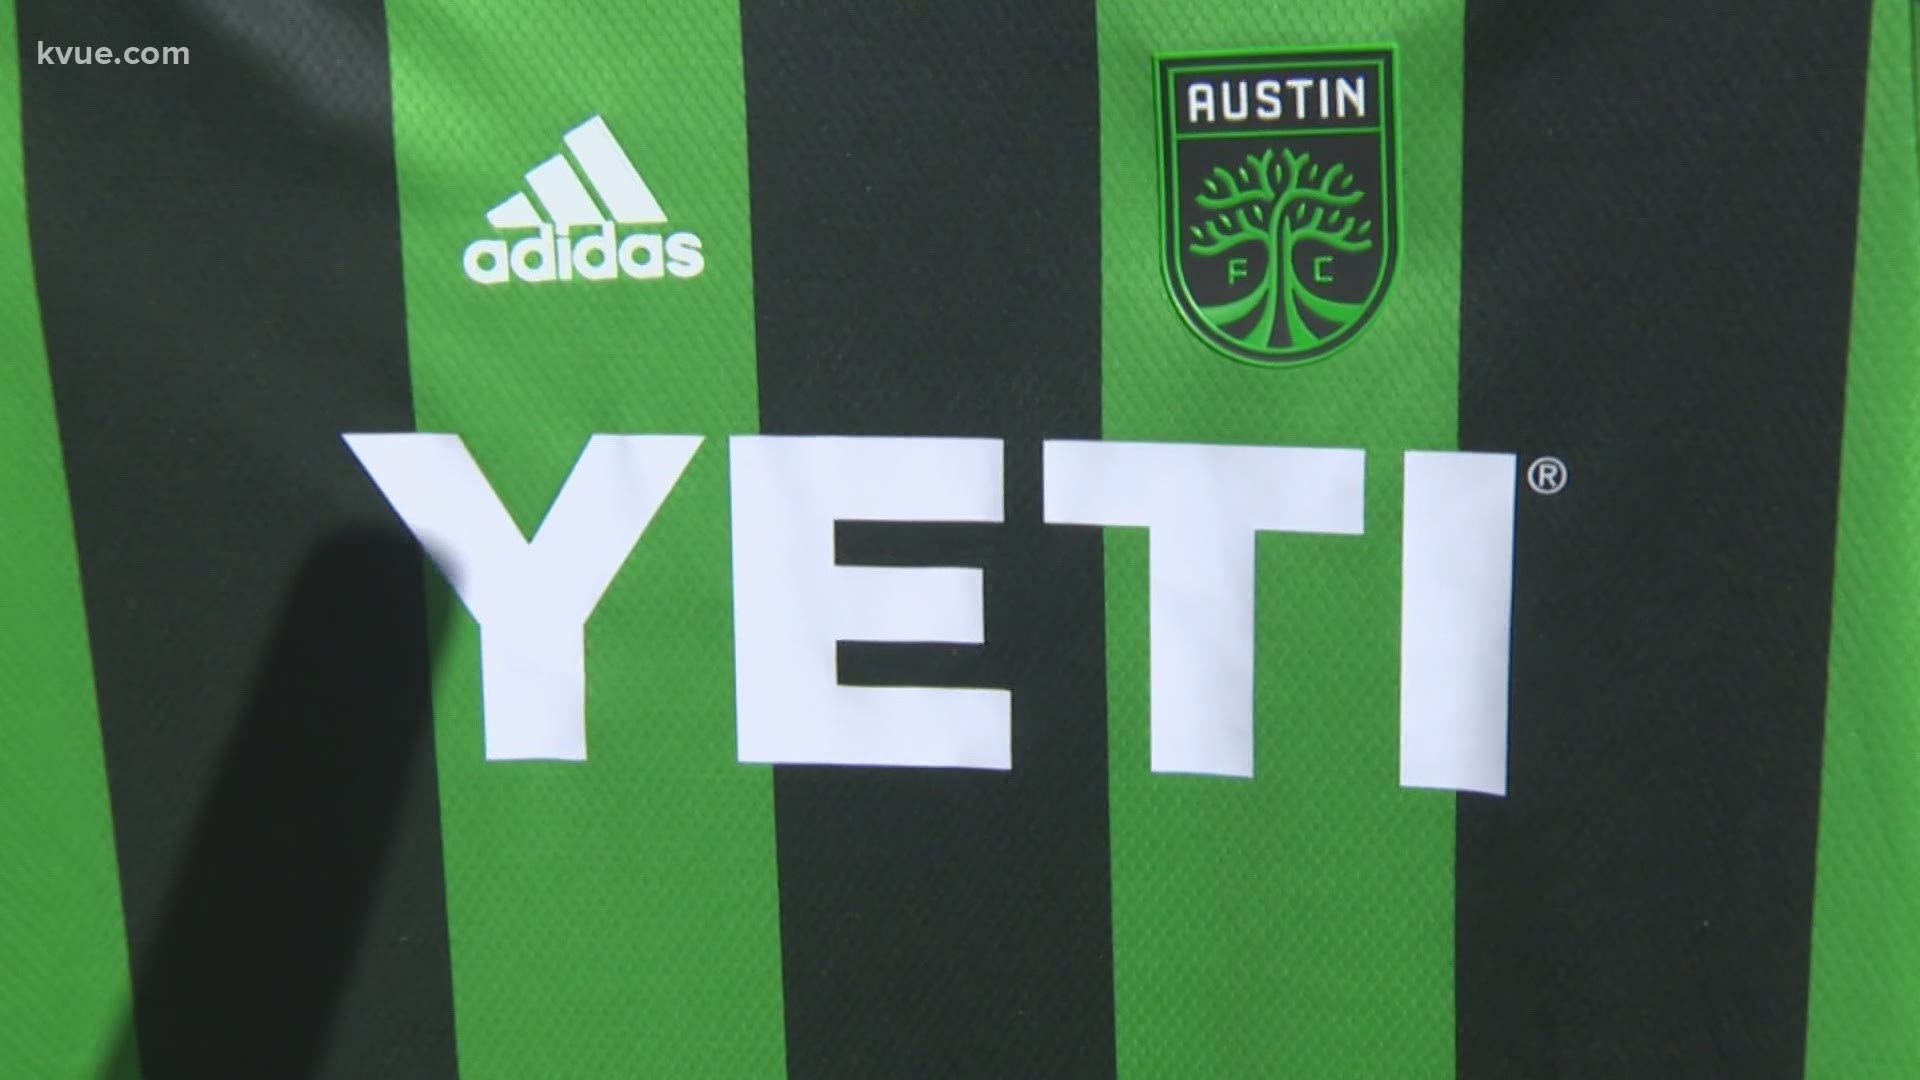 On March 8, 26 players and a handful of coaches will gather and Austin FC's first preseason training camp will begin. The team will practice at St. Edward's.